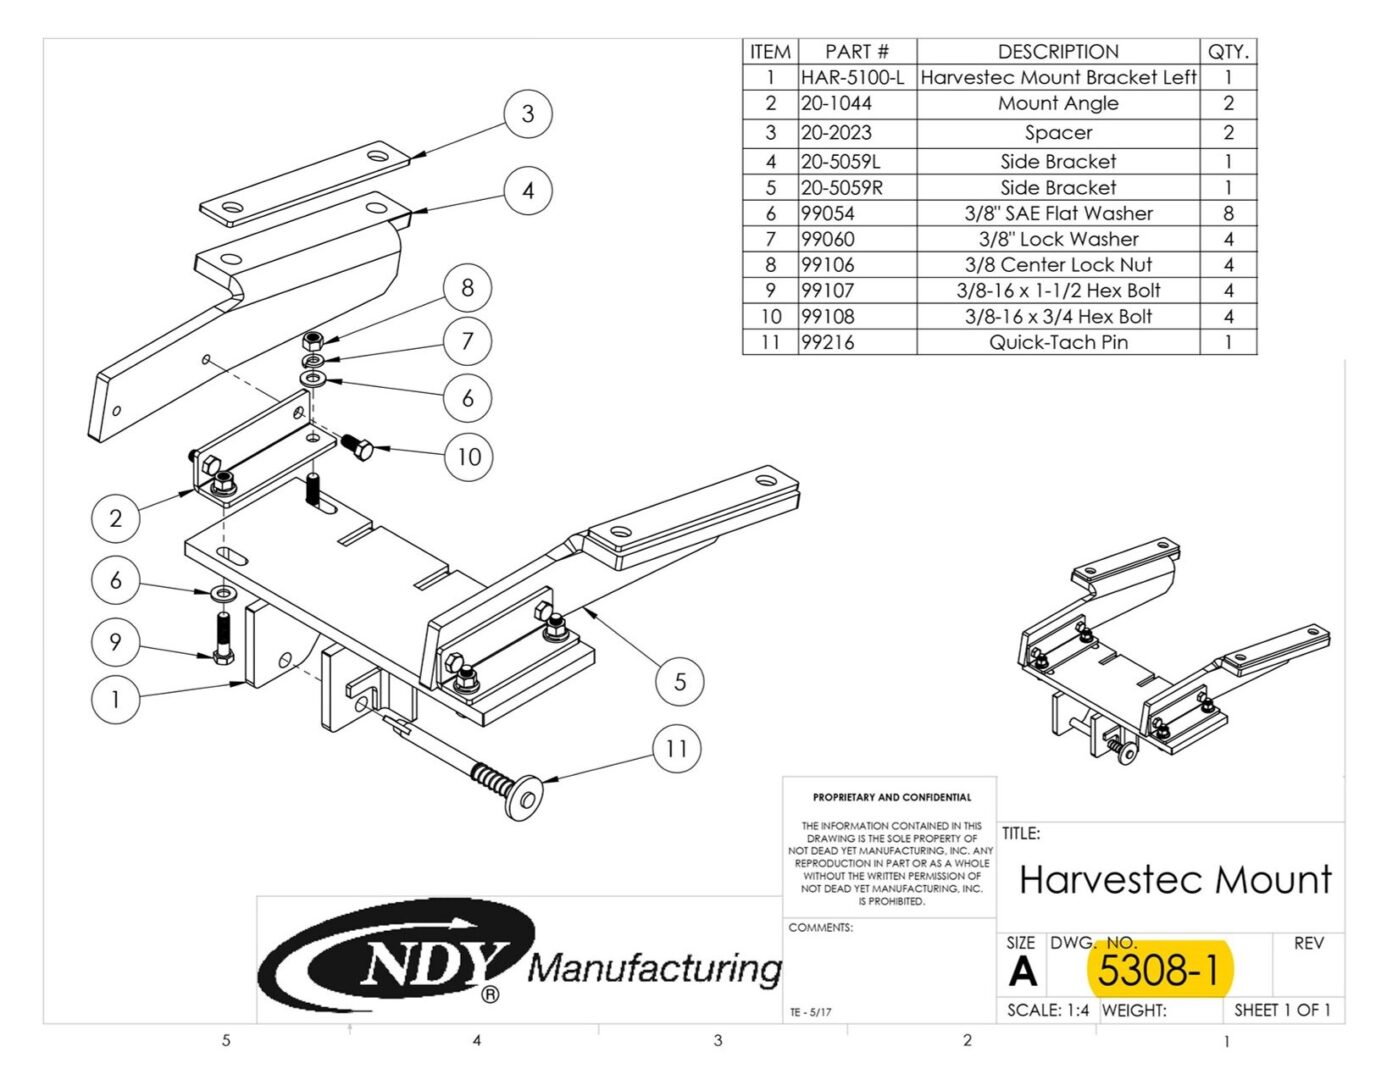 A diagram showing the parts of a Stalk Stomper Mount Assembly for Row 1, 2, 3, 4, 5 on Harvestec 5308 Series Corn Head.